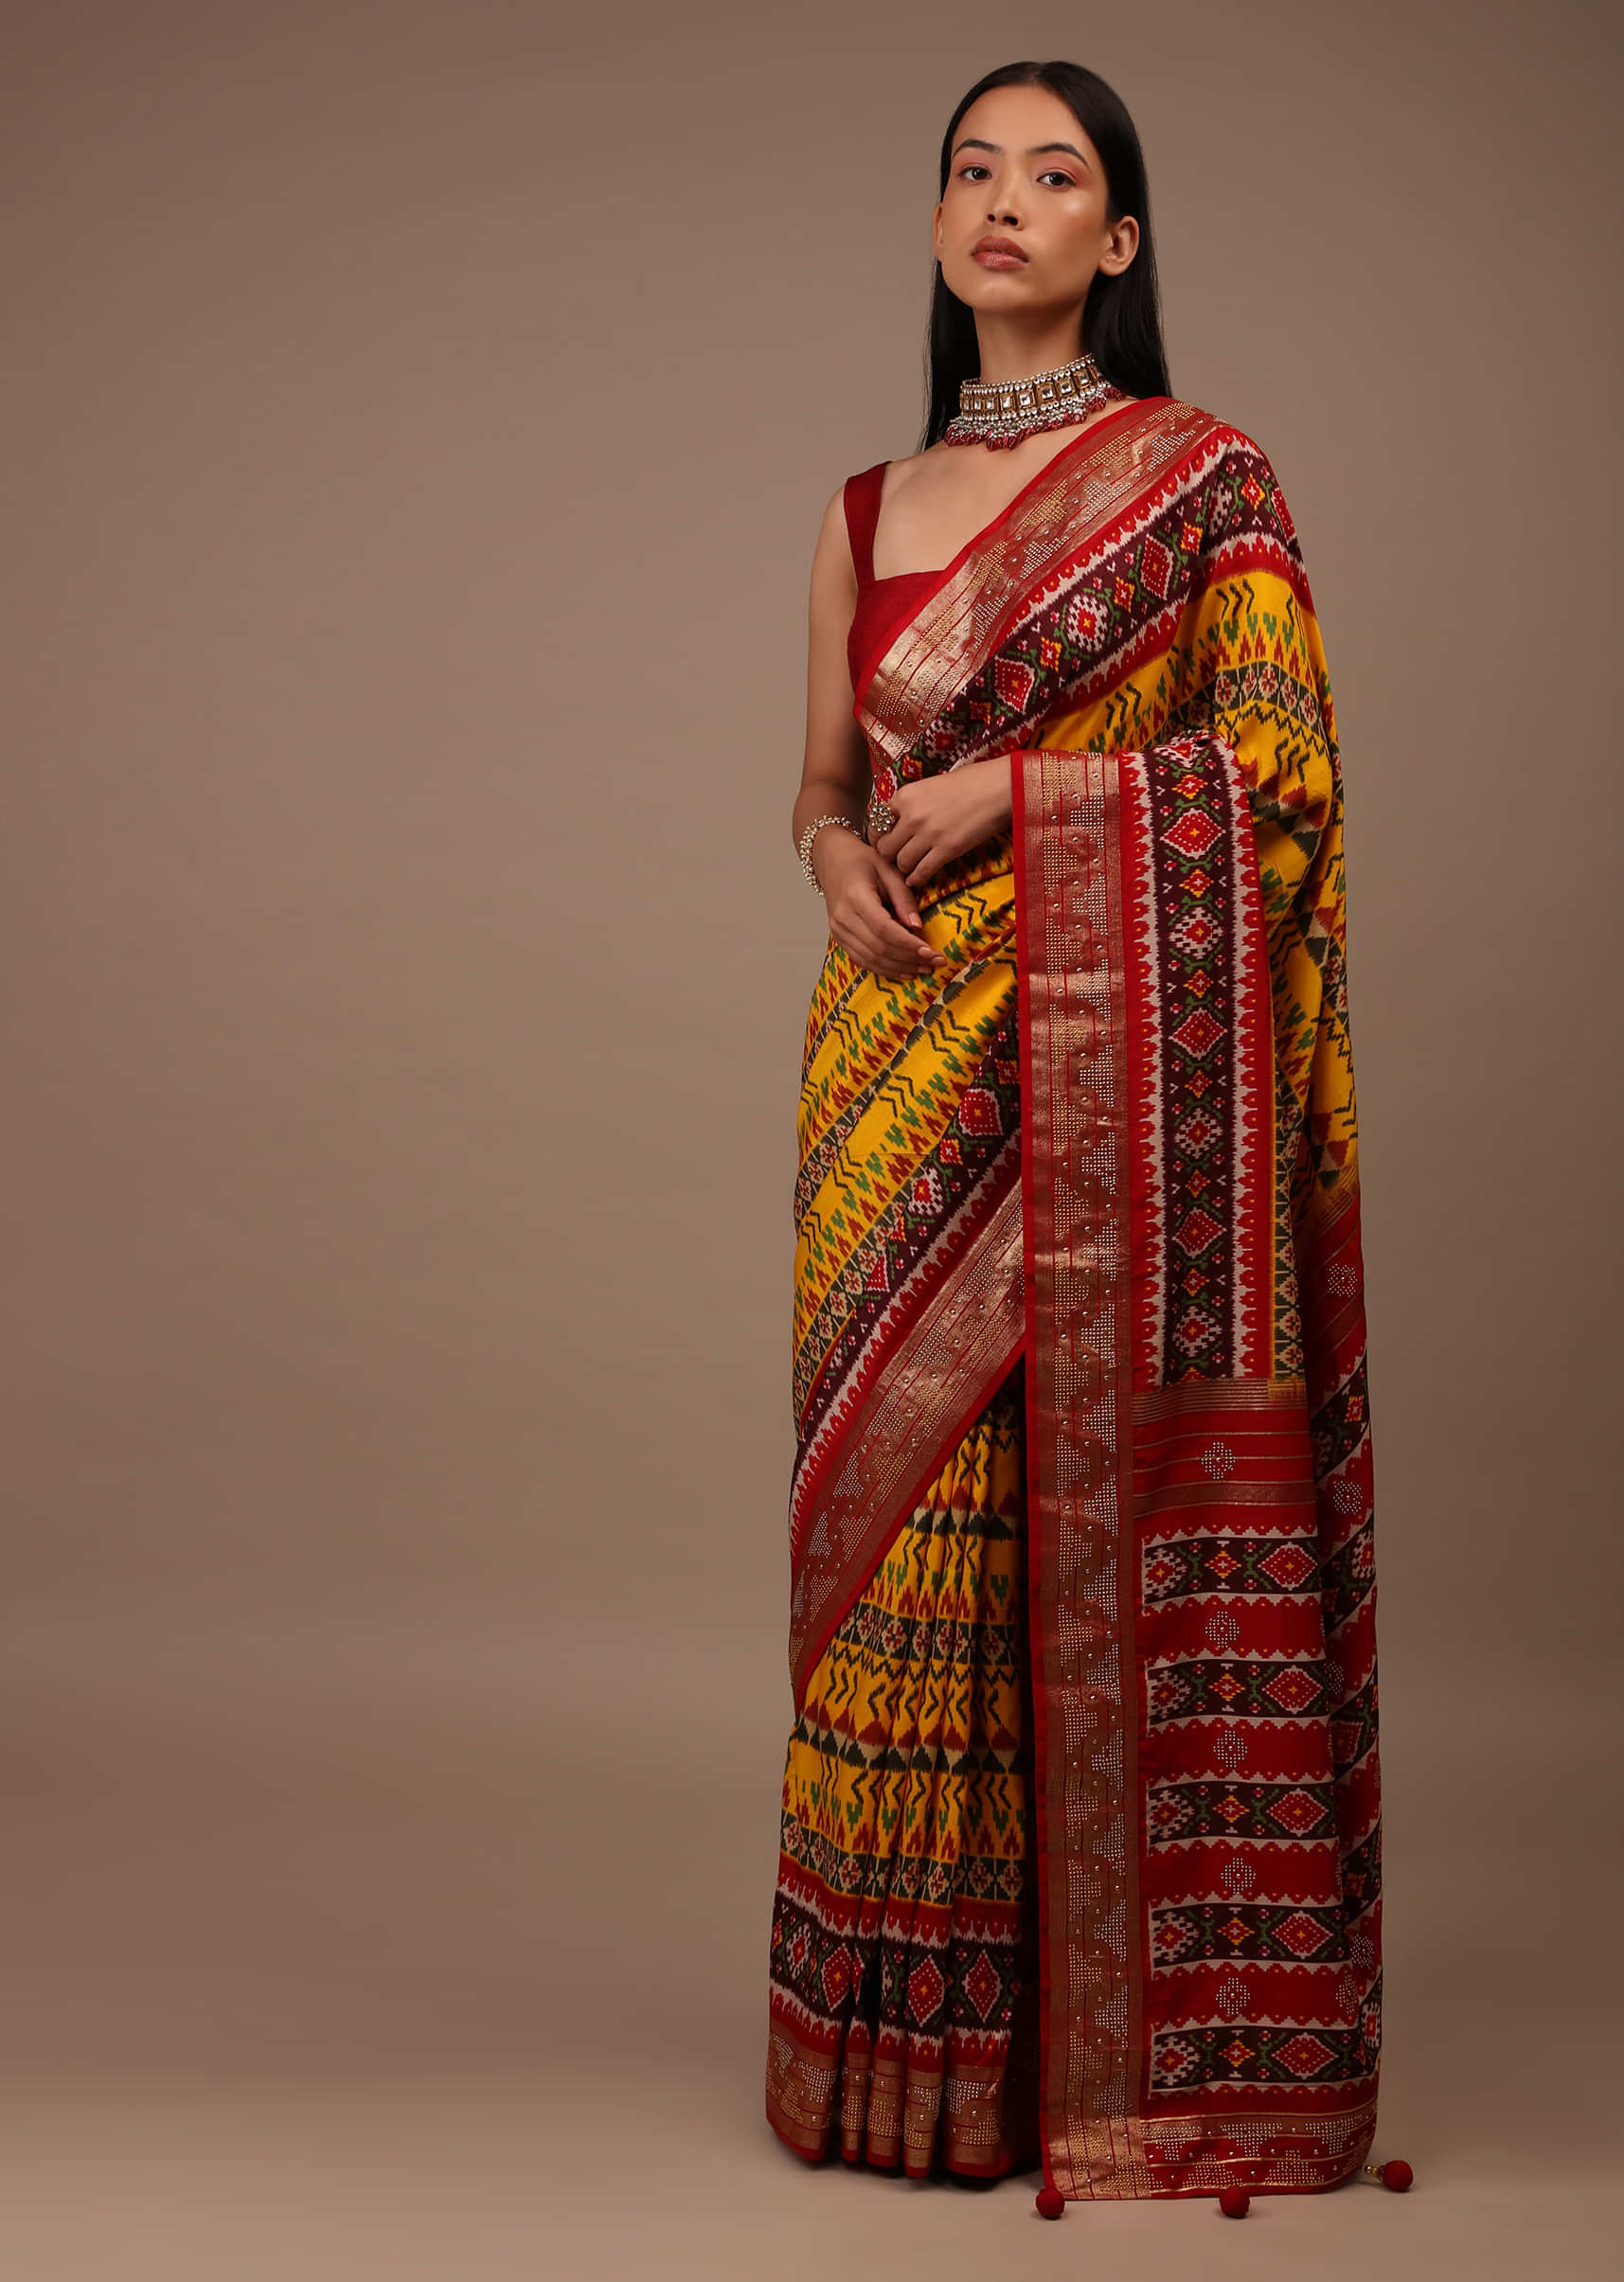 Chrome Yellow Saree In Silk With Multi Colored Patola And Foil Print And Contrasting Maroon Border